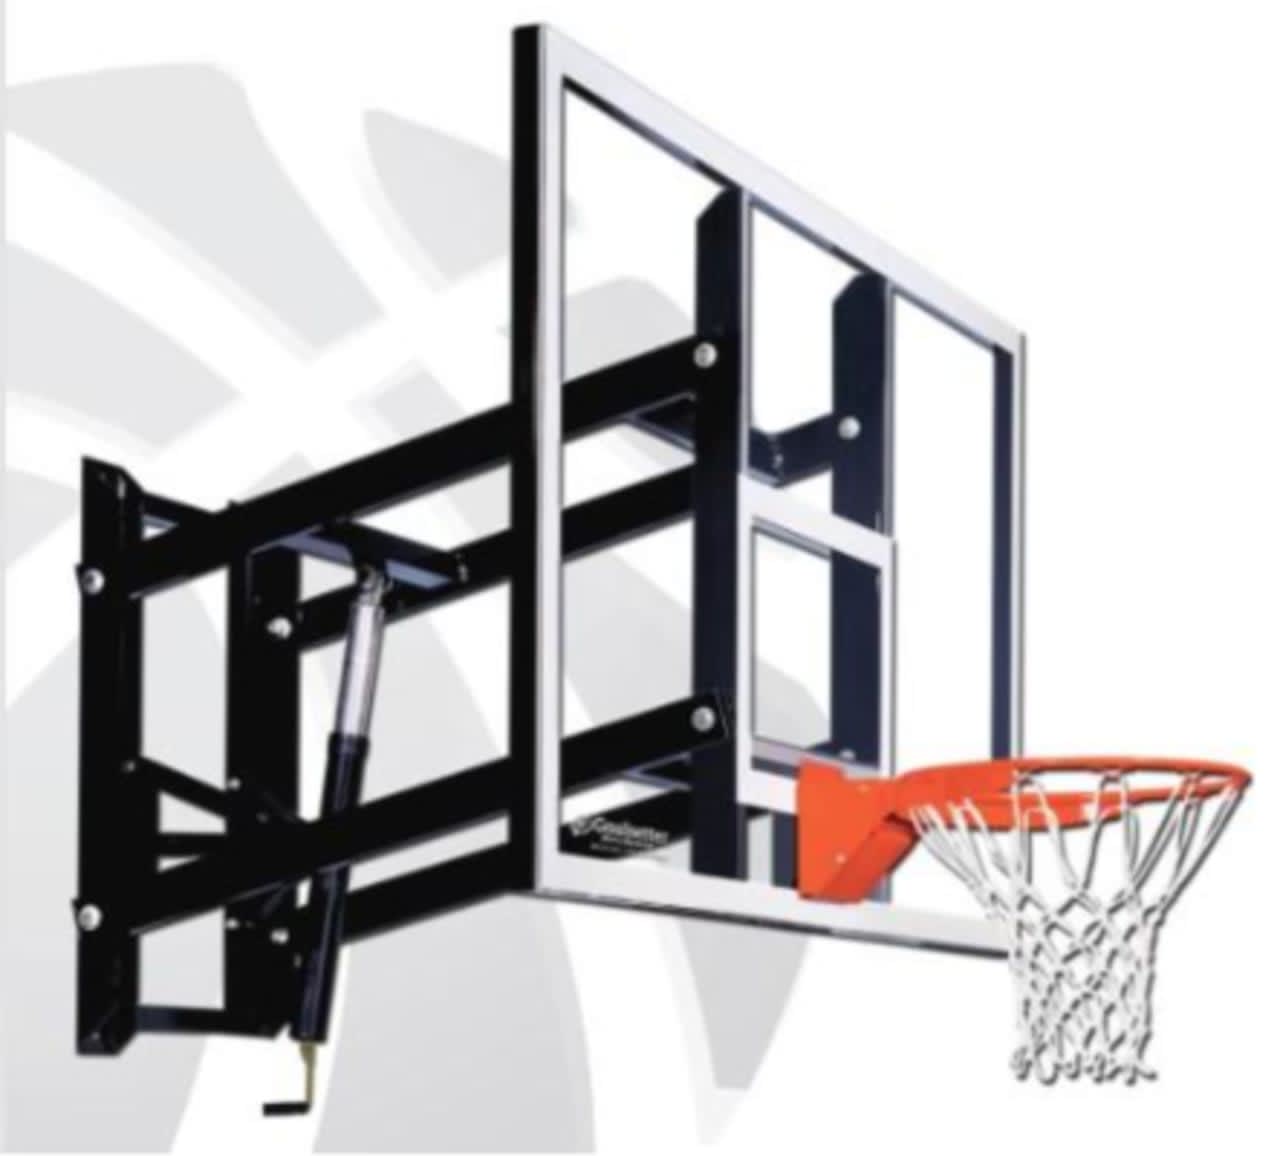 18,000 wall-mounted basketball hoops produced by Goalsetter are being recalled after many detached from the wall and cause injuries and death.